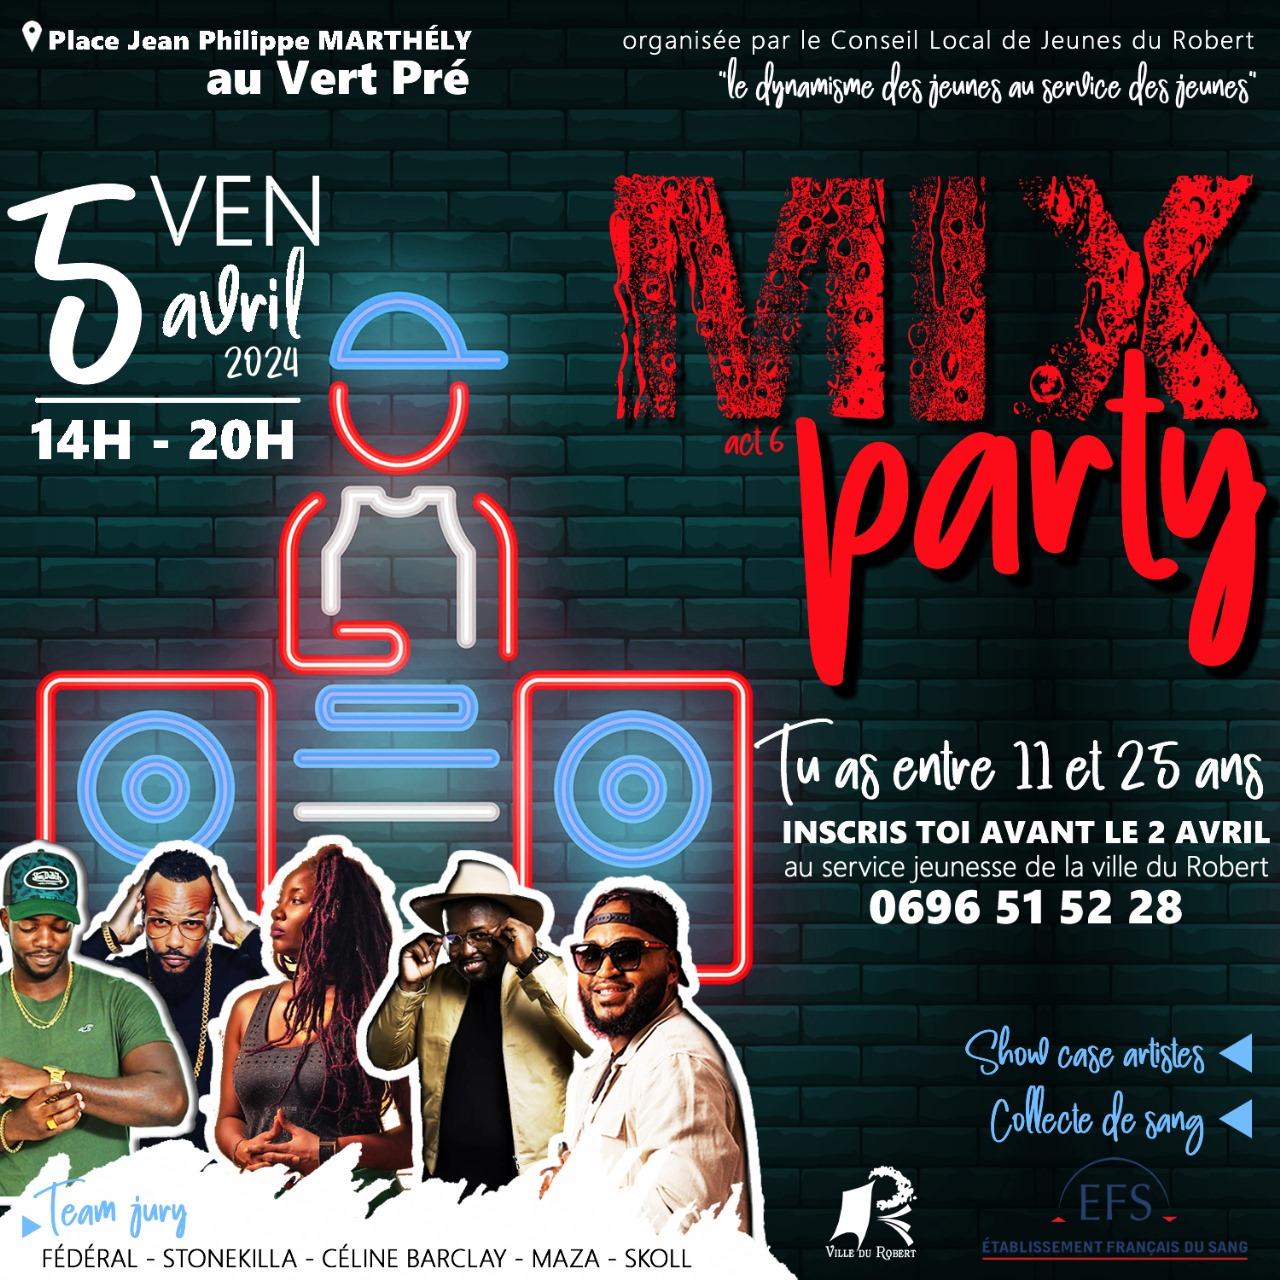 VENDREDI 5 AVRIL 2024 : MIX PARTY act 6